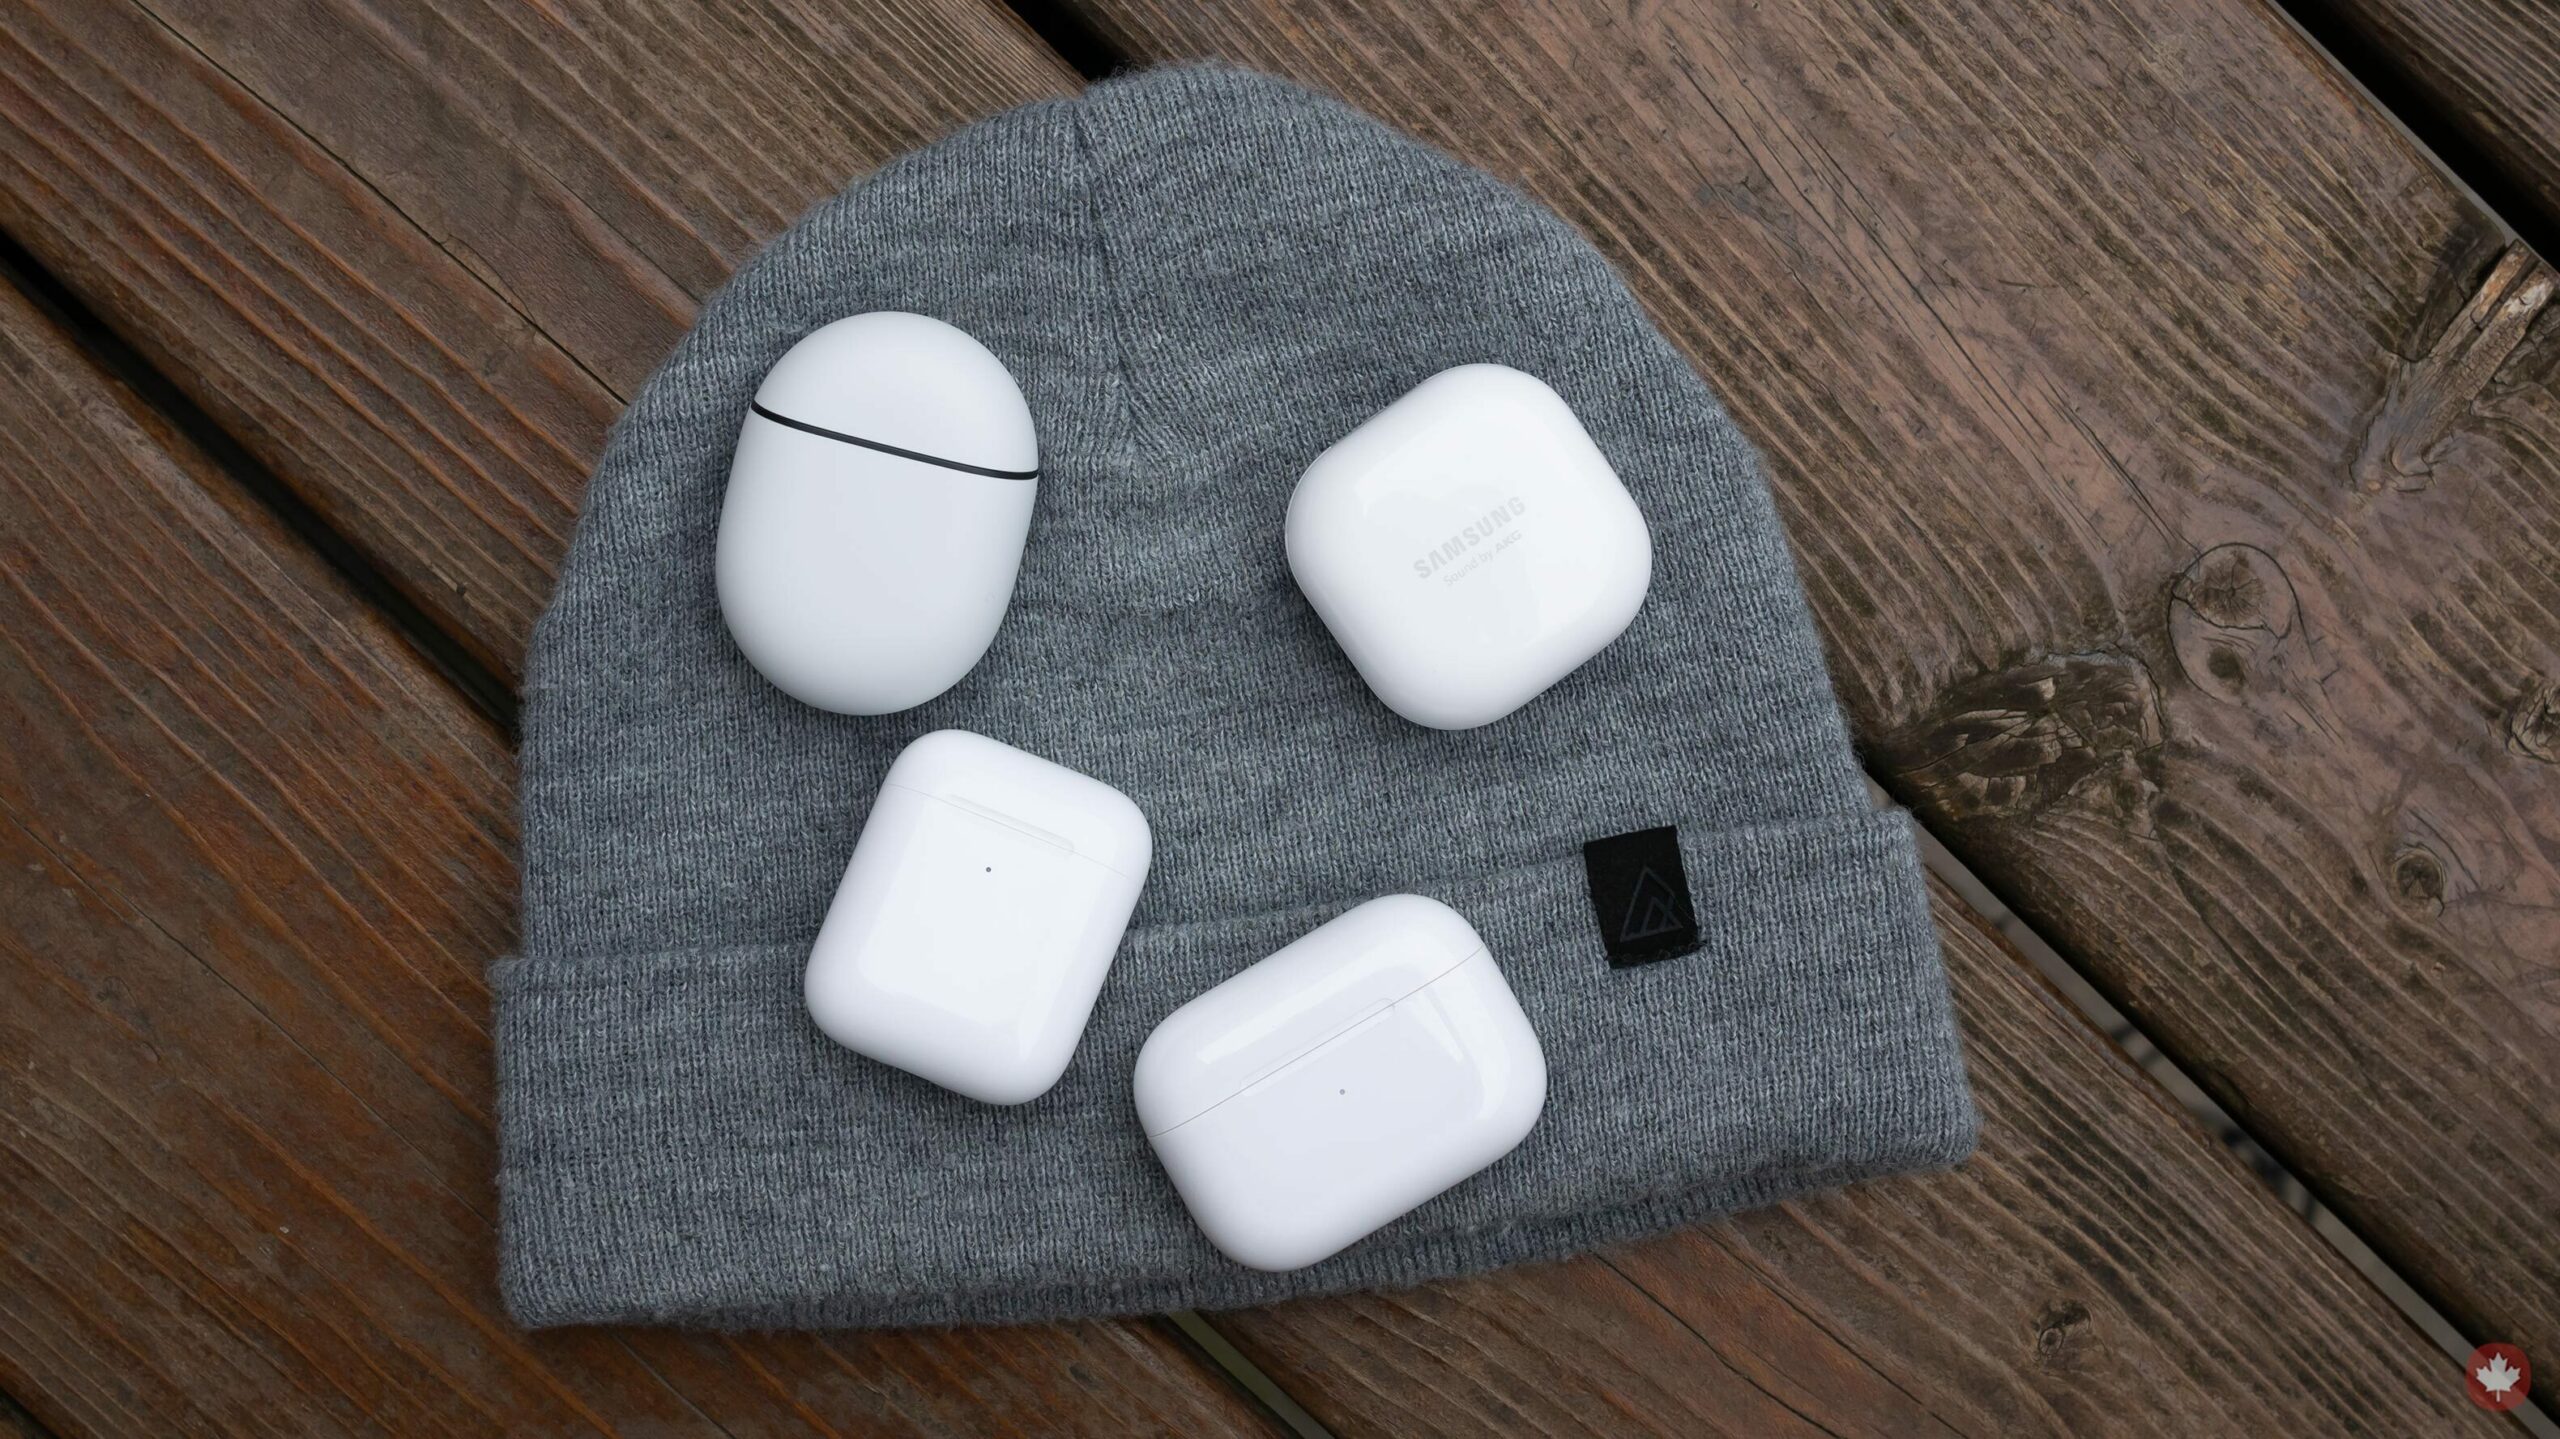 Earbuds on a touque